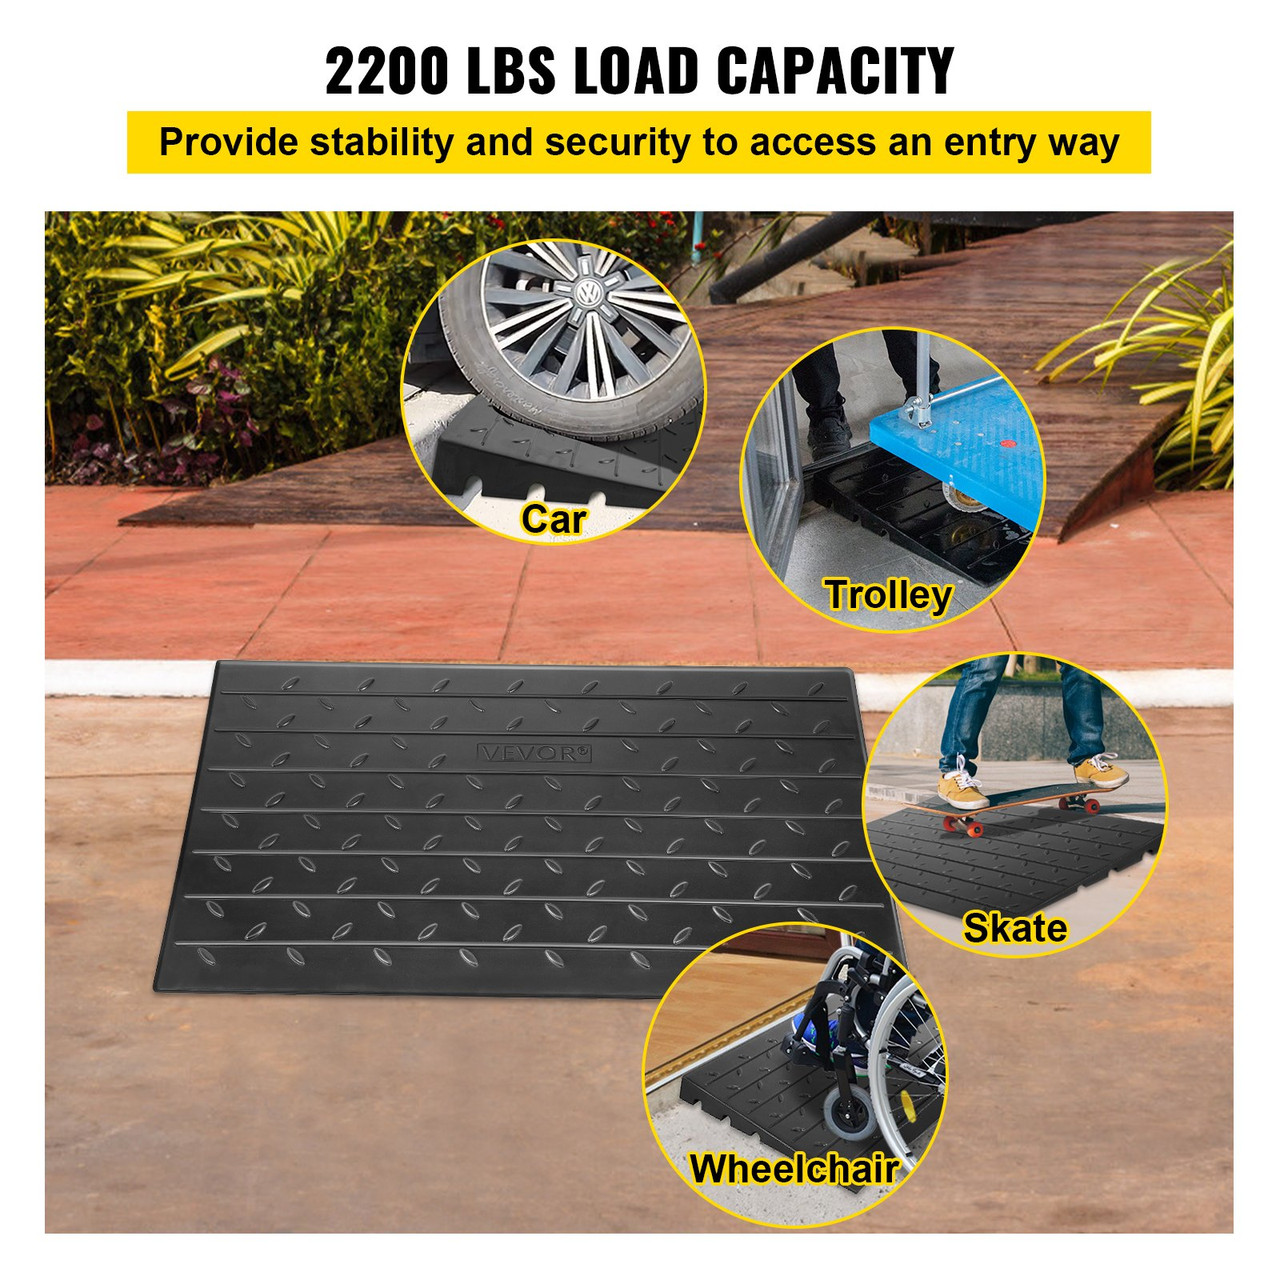 Rubber Threshold Ramp, 4" Rise Threshold Ramp Doorway, 3 Channels Cord Cover Rubber Solid Threshold Ramp, Transitions Rubber Angled Entry Rated 2200 Lbs Load Capacity for Wheelchair and Scooter